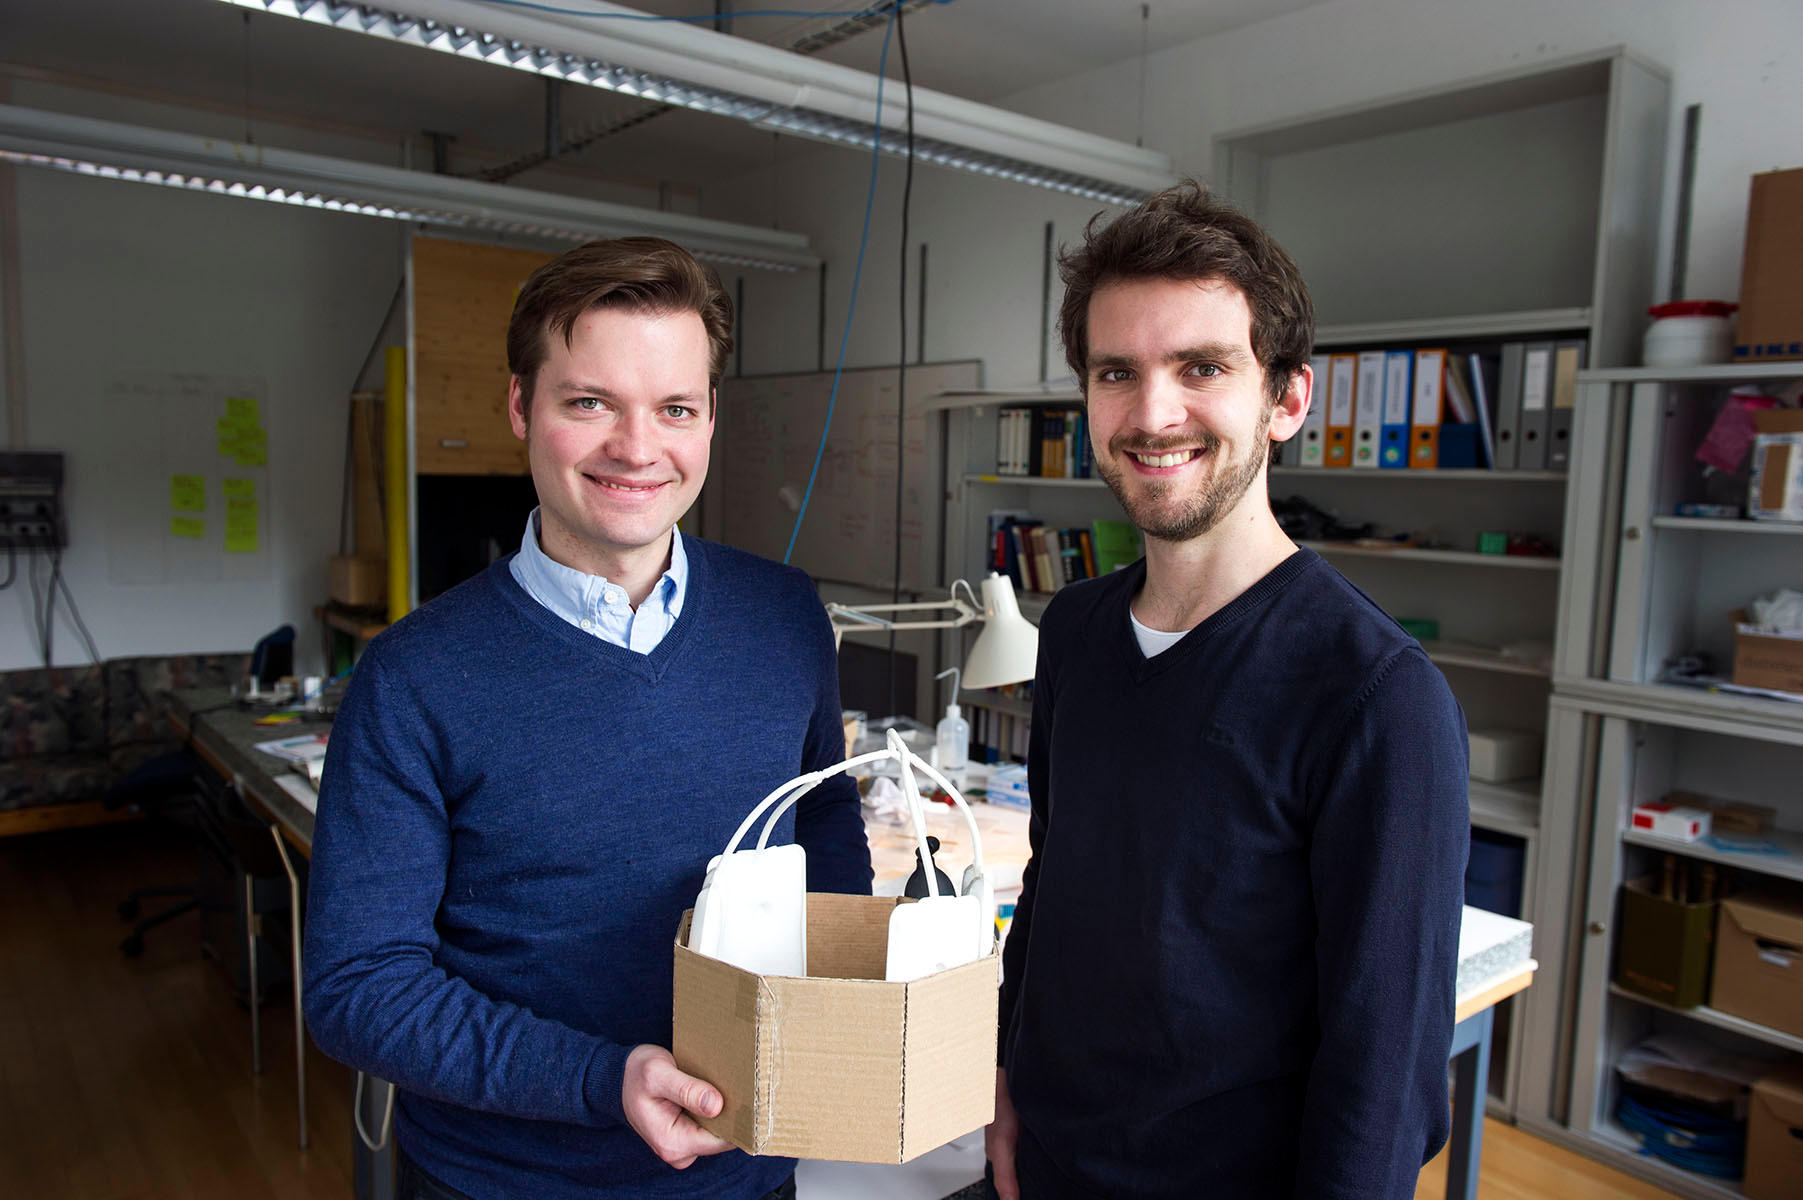 Jannis Fischer (left) and Max Ahnen with a simple model of the head part of their BPET scanner